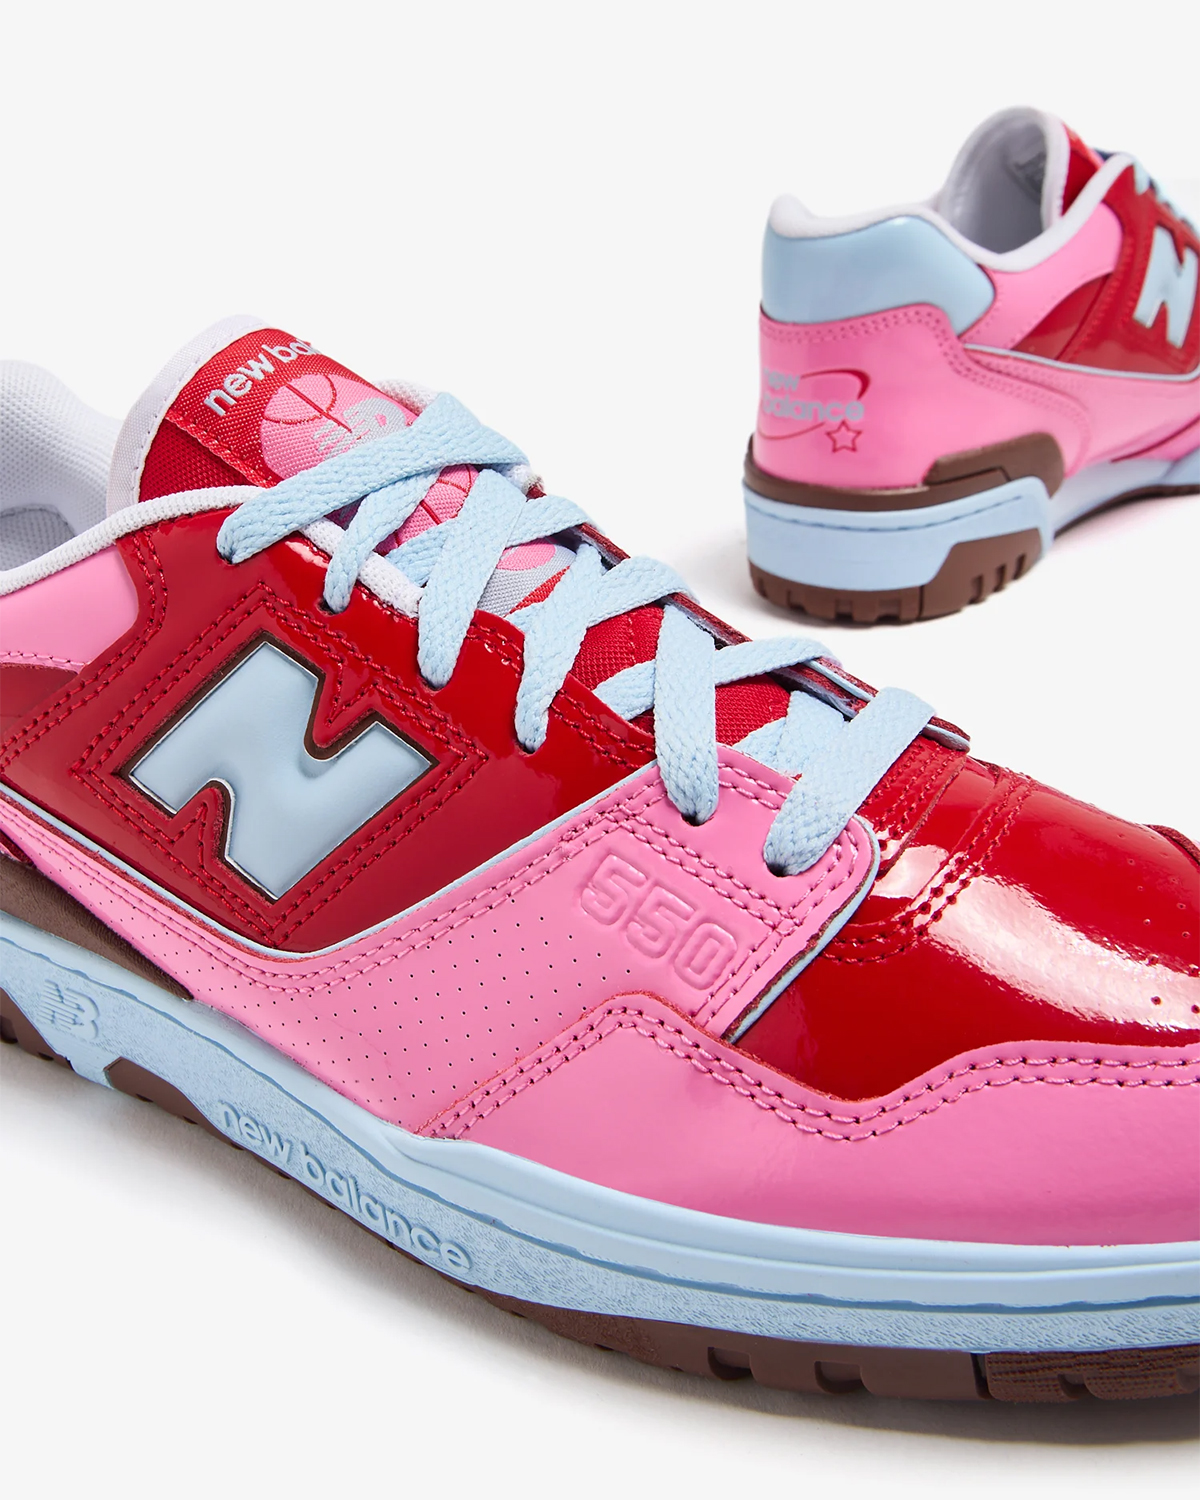 New Balance MS997 "Better Days" low-top sneakers